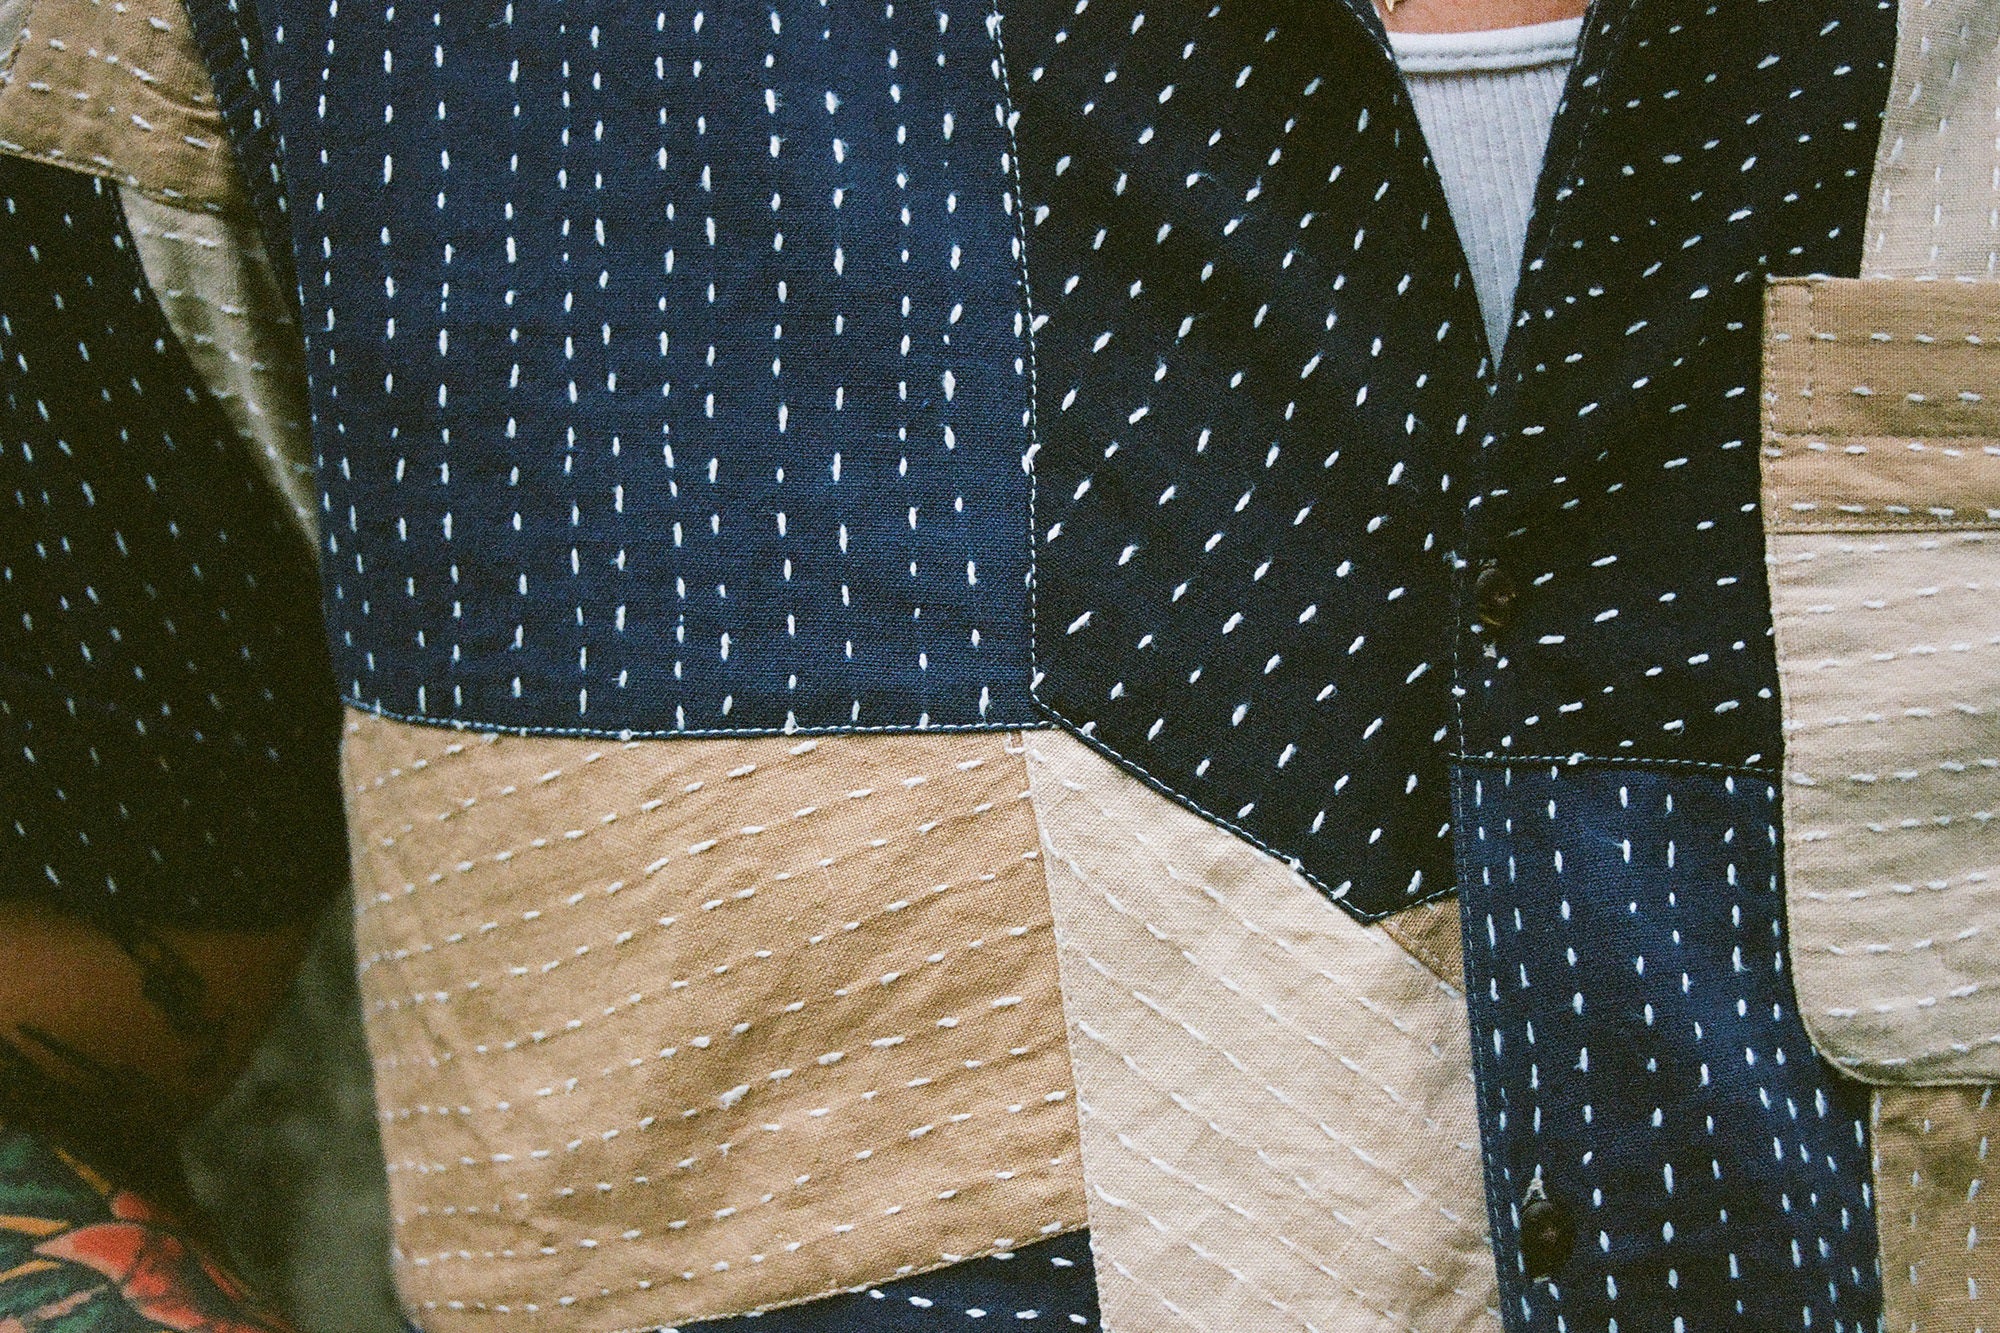 A close up detail of a patchwork shirt showing thick white hand-stitched threads throughout.